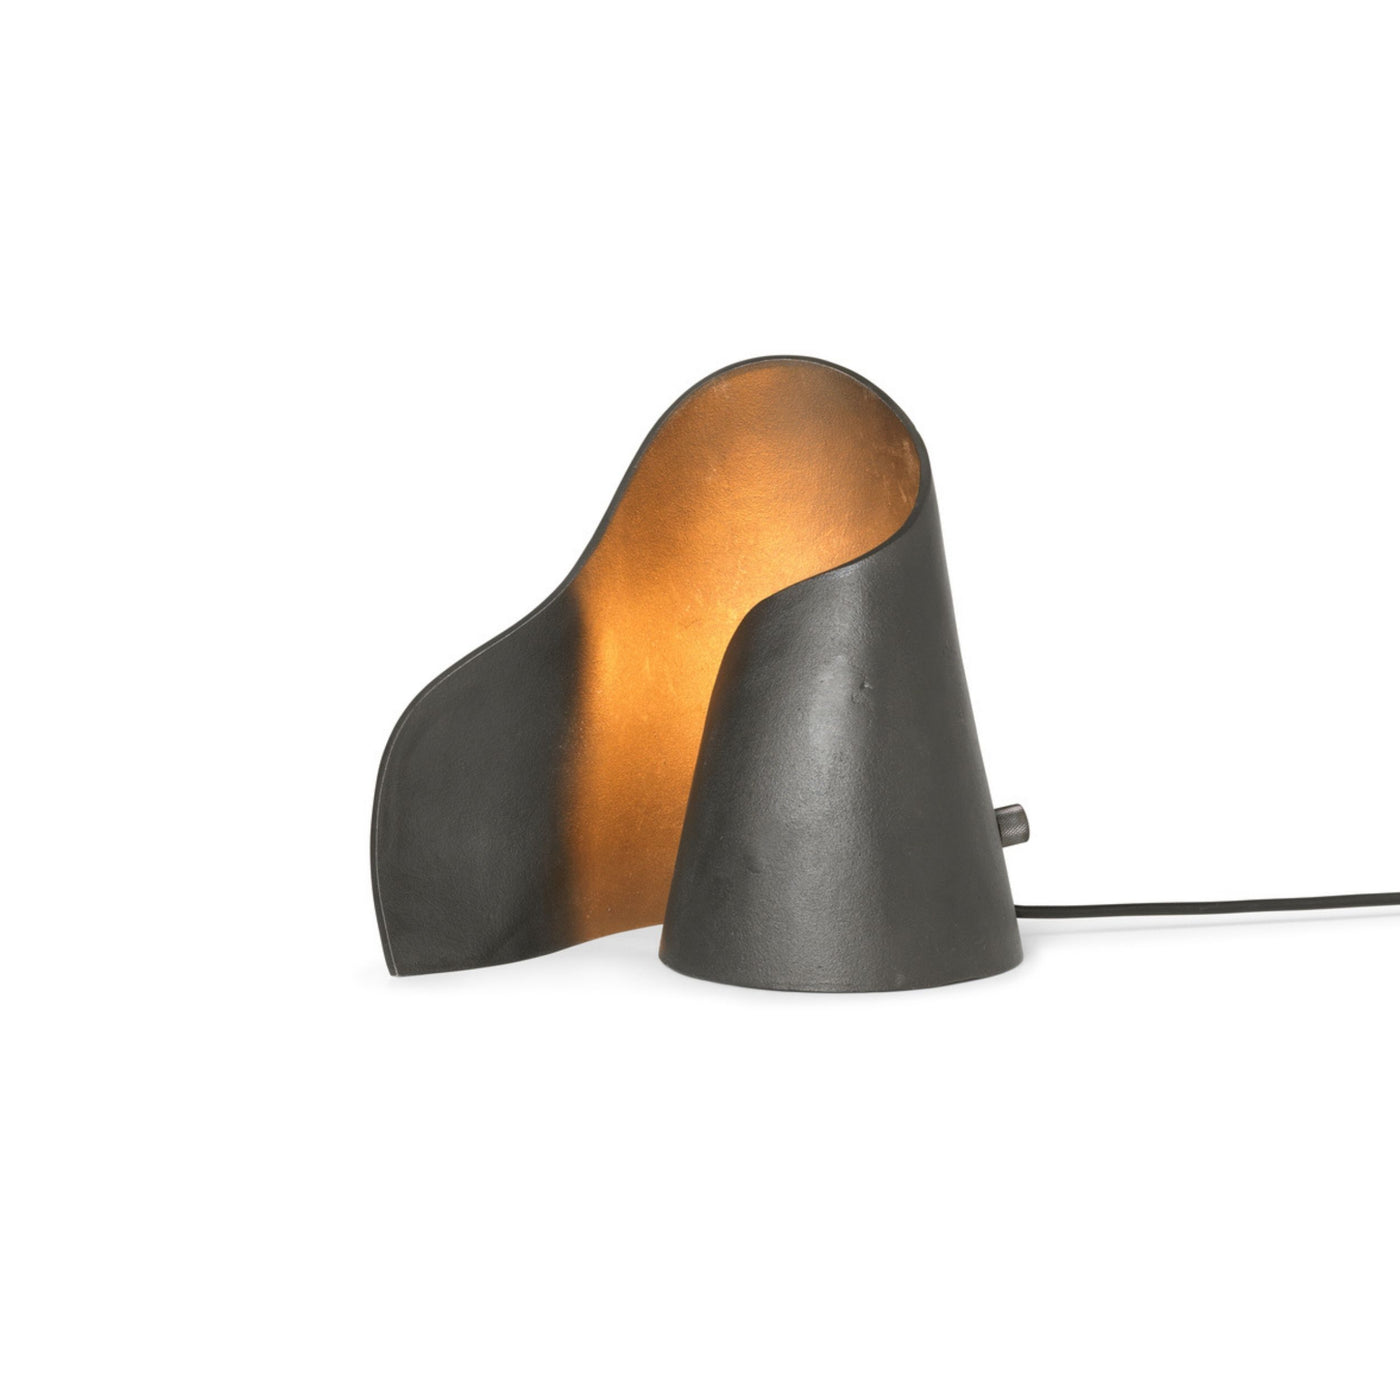 Ferm Living Oyster Table Lamp. Shop online at someday designs